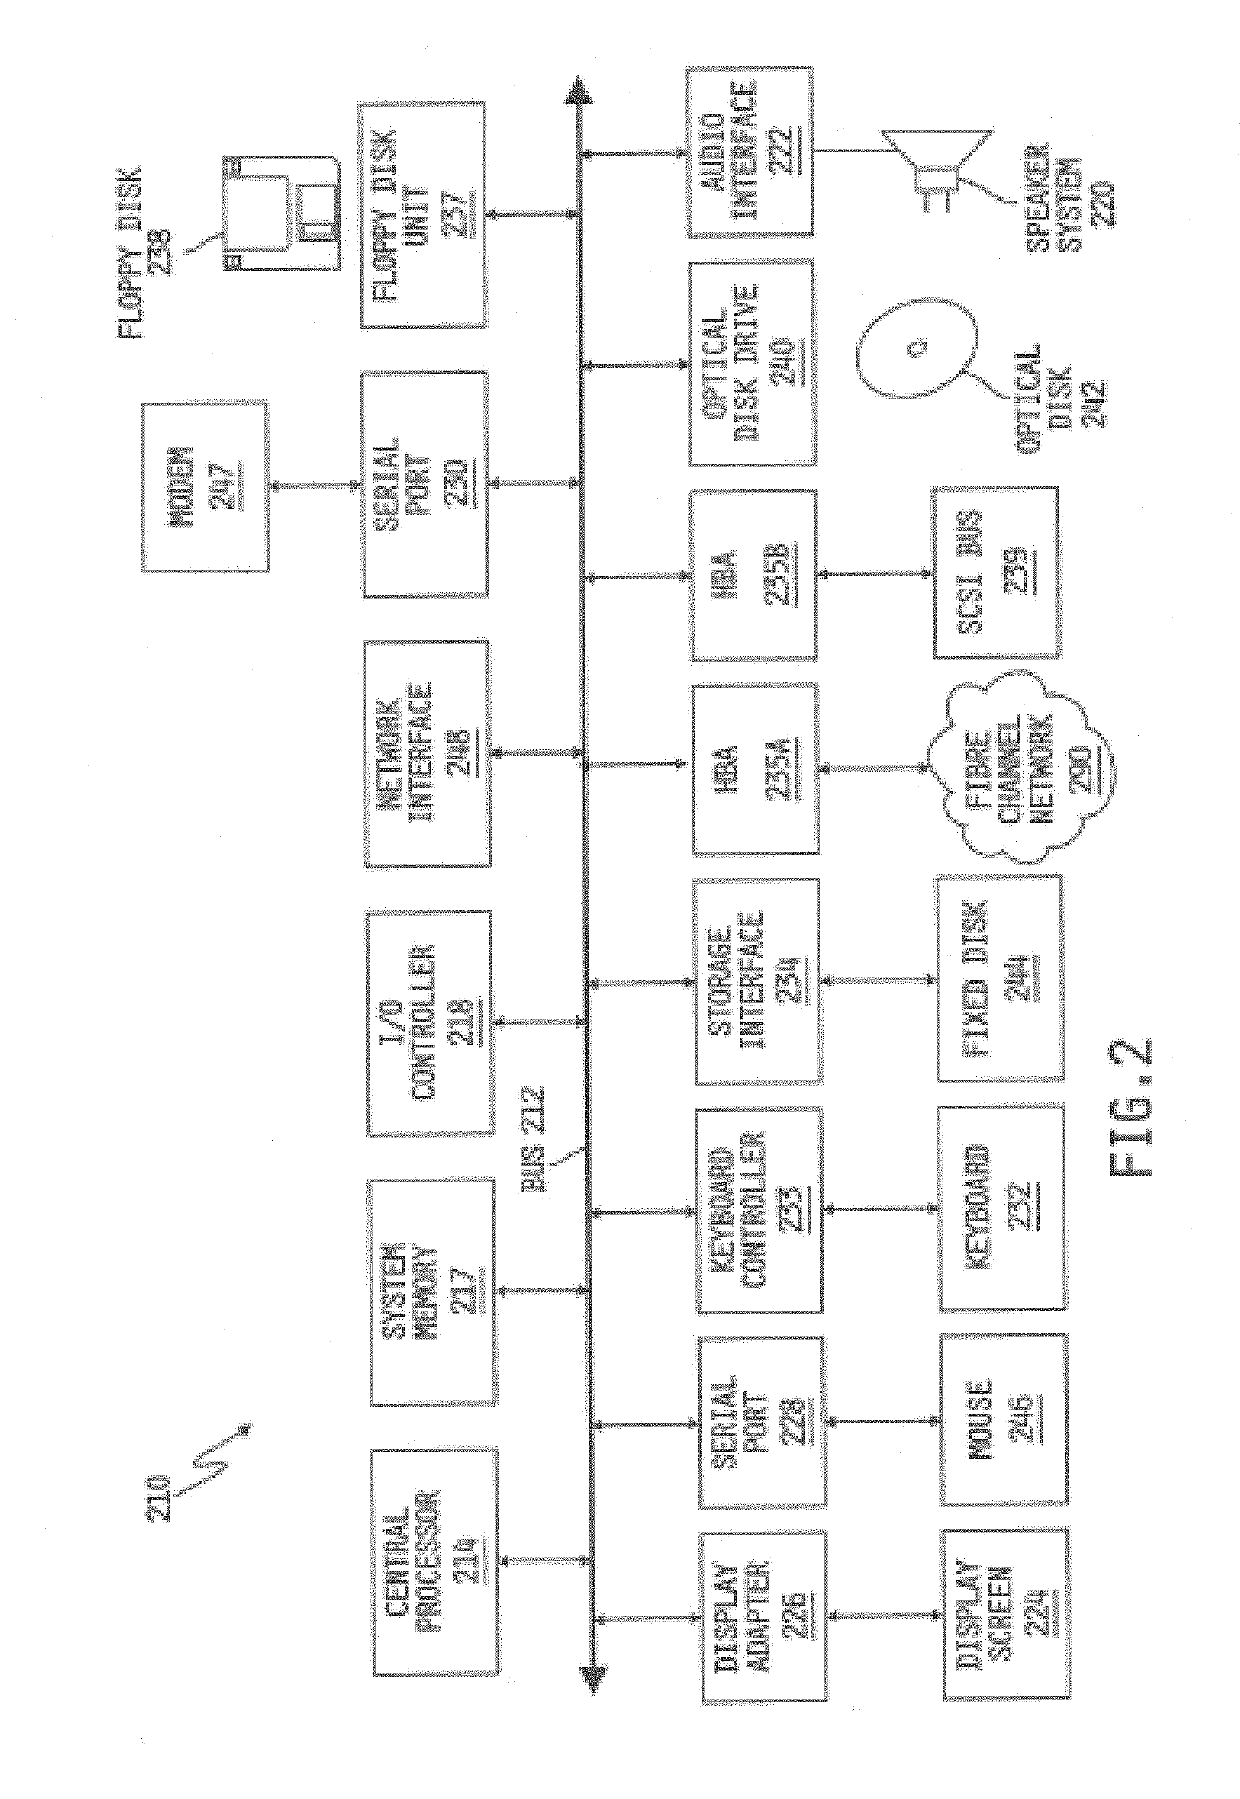 Networking systems and methods for facilitating communication and collaboration using a social-network and interactive approach